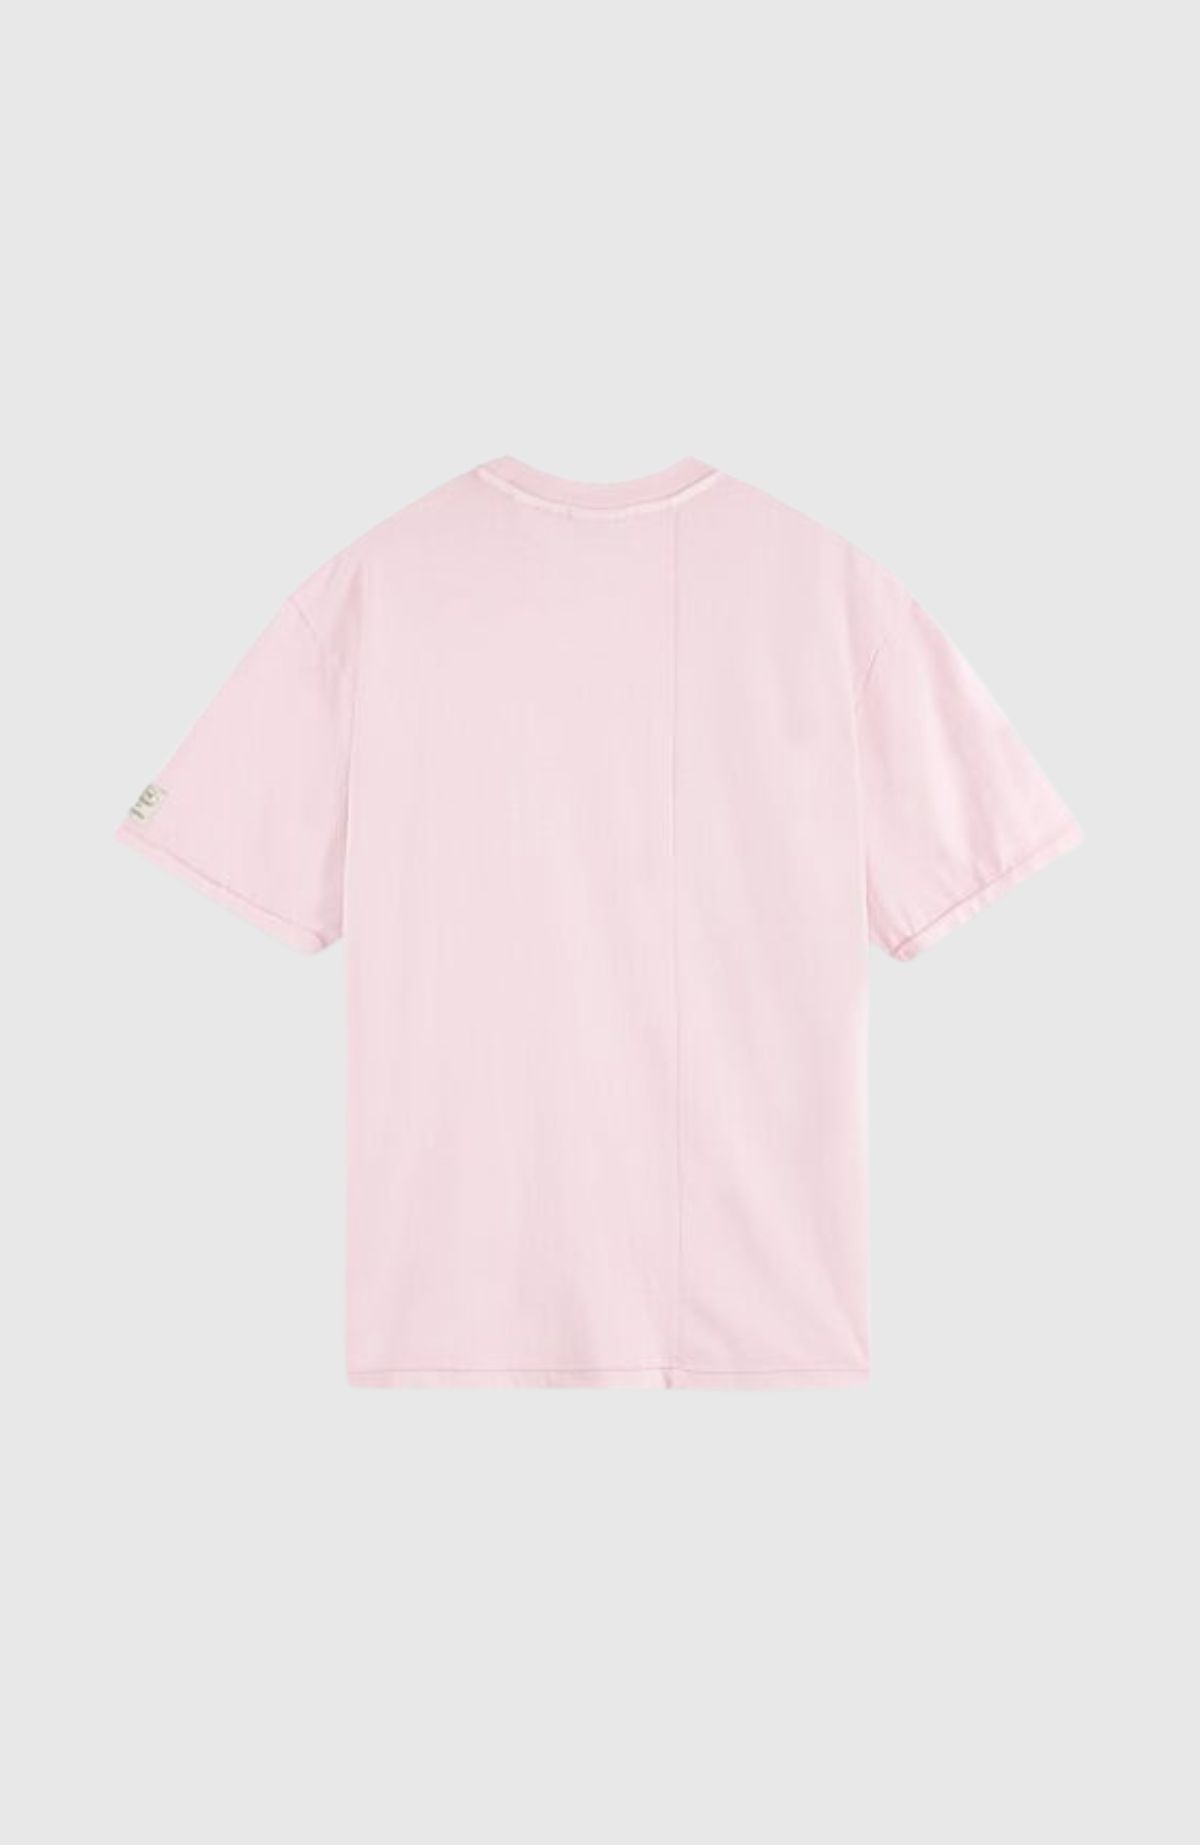 Garment dye tee with chest pocket